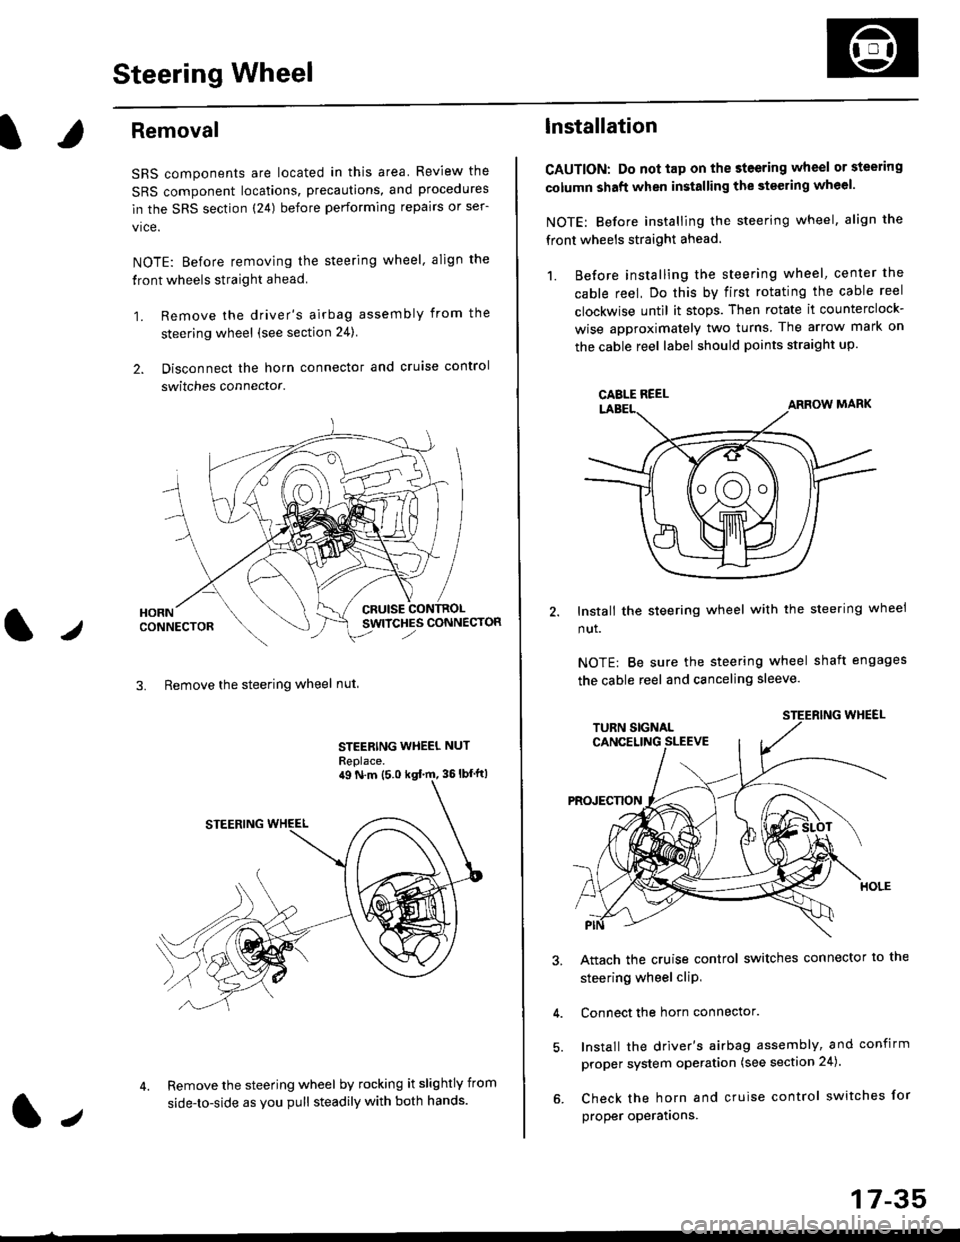 HONDA CIVIC 1996 6.G Owners Manual Steering Wheel
l,/
Removal
SRS components are located in this area Review the
SRS component locations, precautions, and procedures
in the SRS section (24) before performing repairs or ser-
vice.
NOTE: